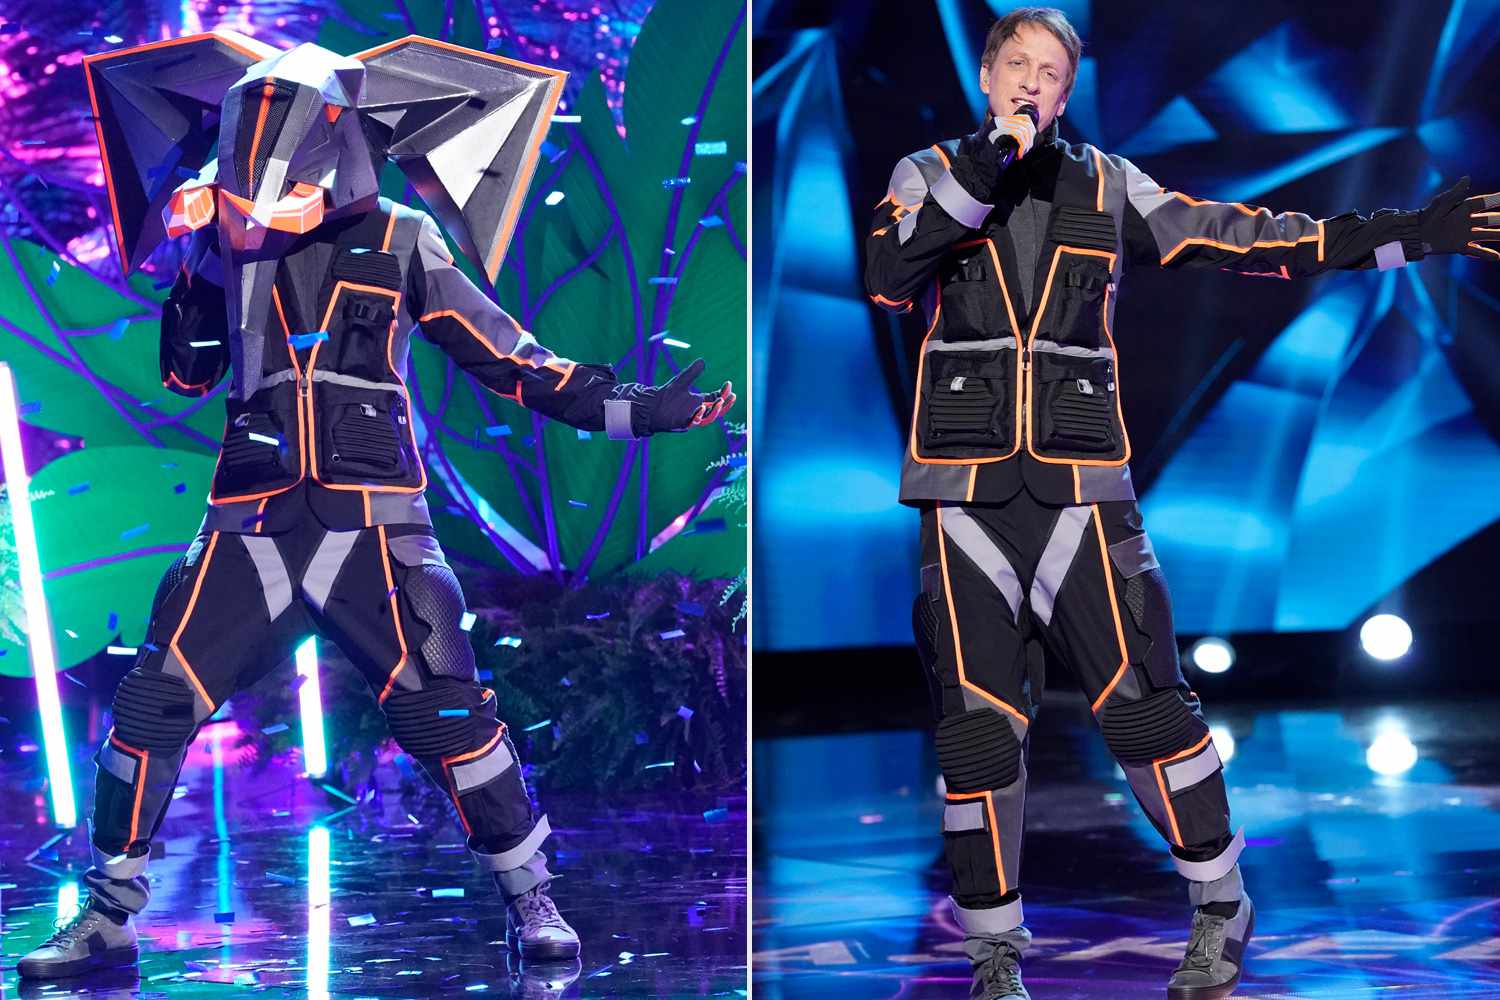 THE MASKED SINGER: Tony Hawk in the “A Brand New Six Pack: Group B Kickoff!” episode of THE MASKED SINGER airing Wednesday, Feb 19